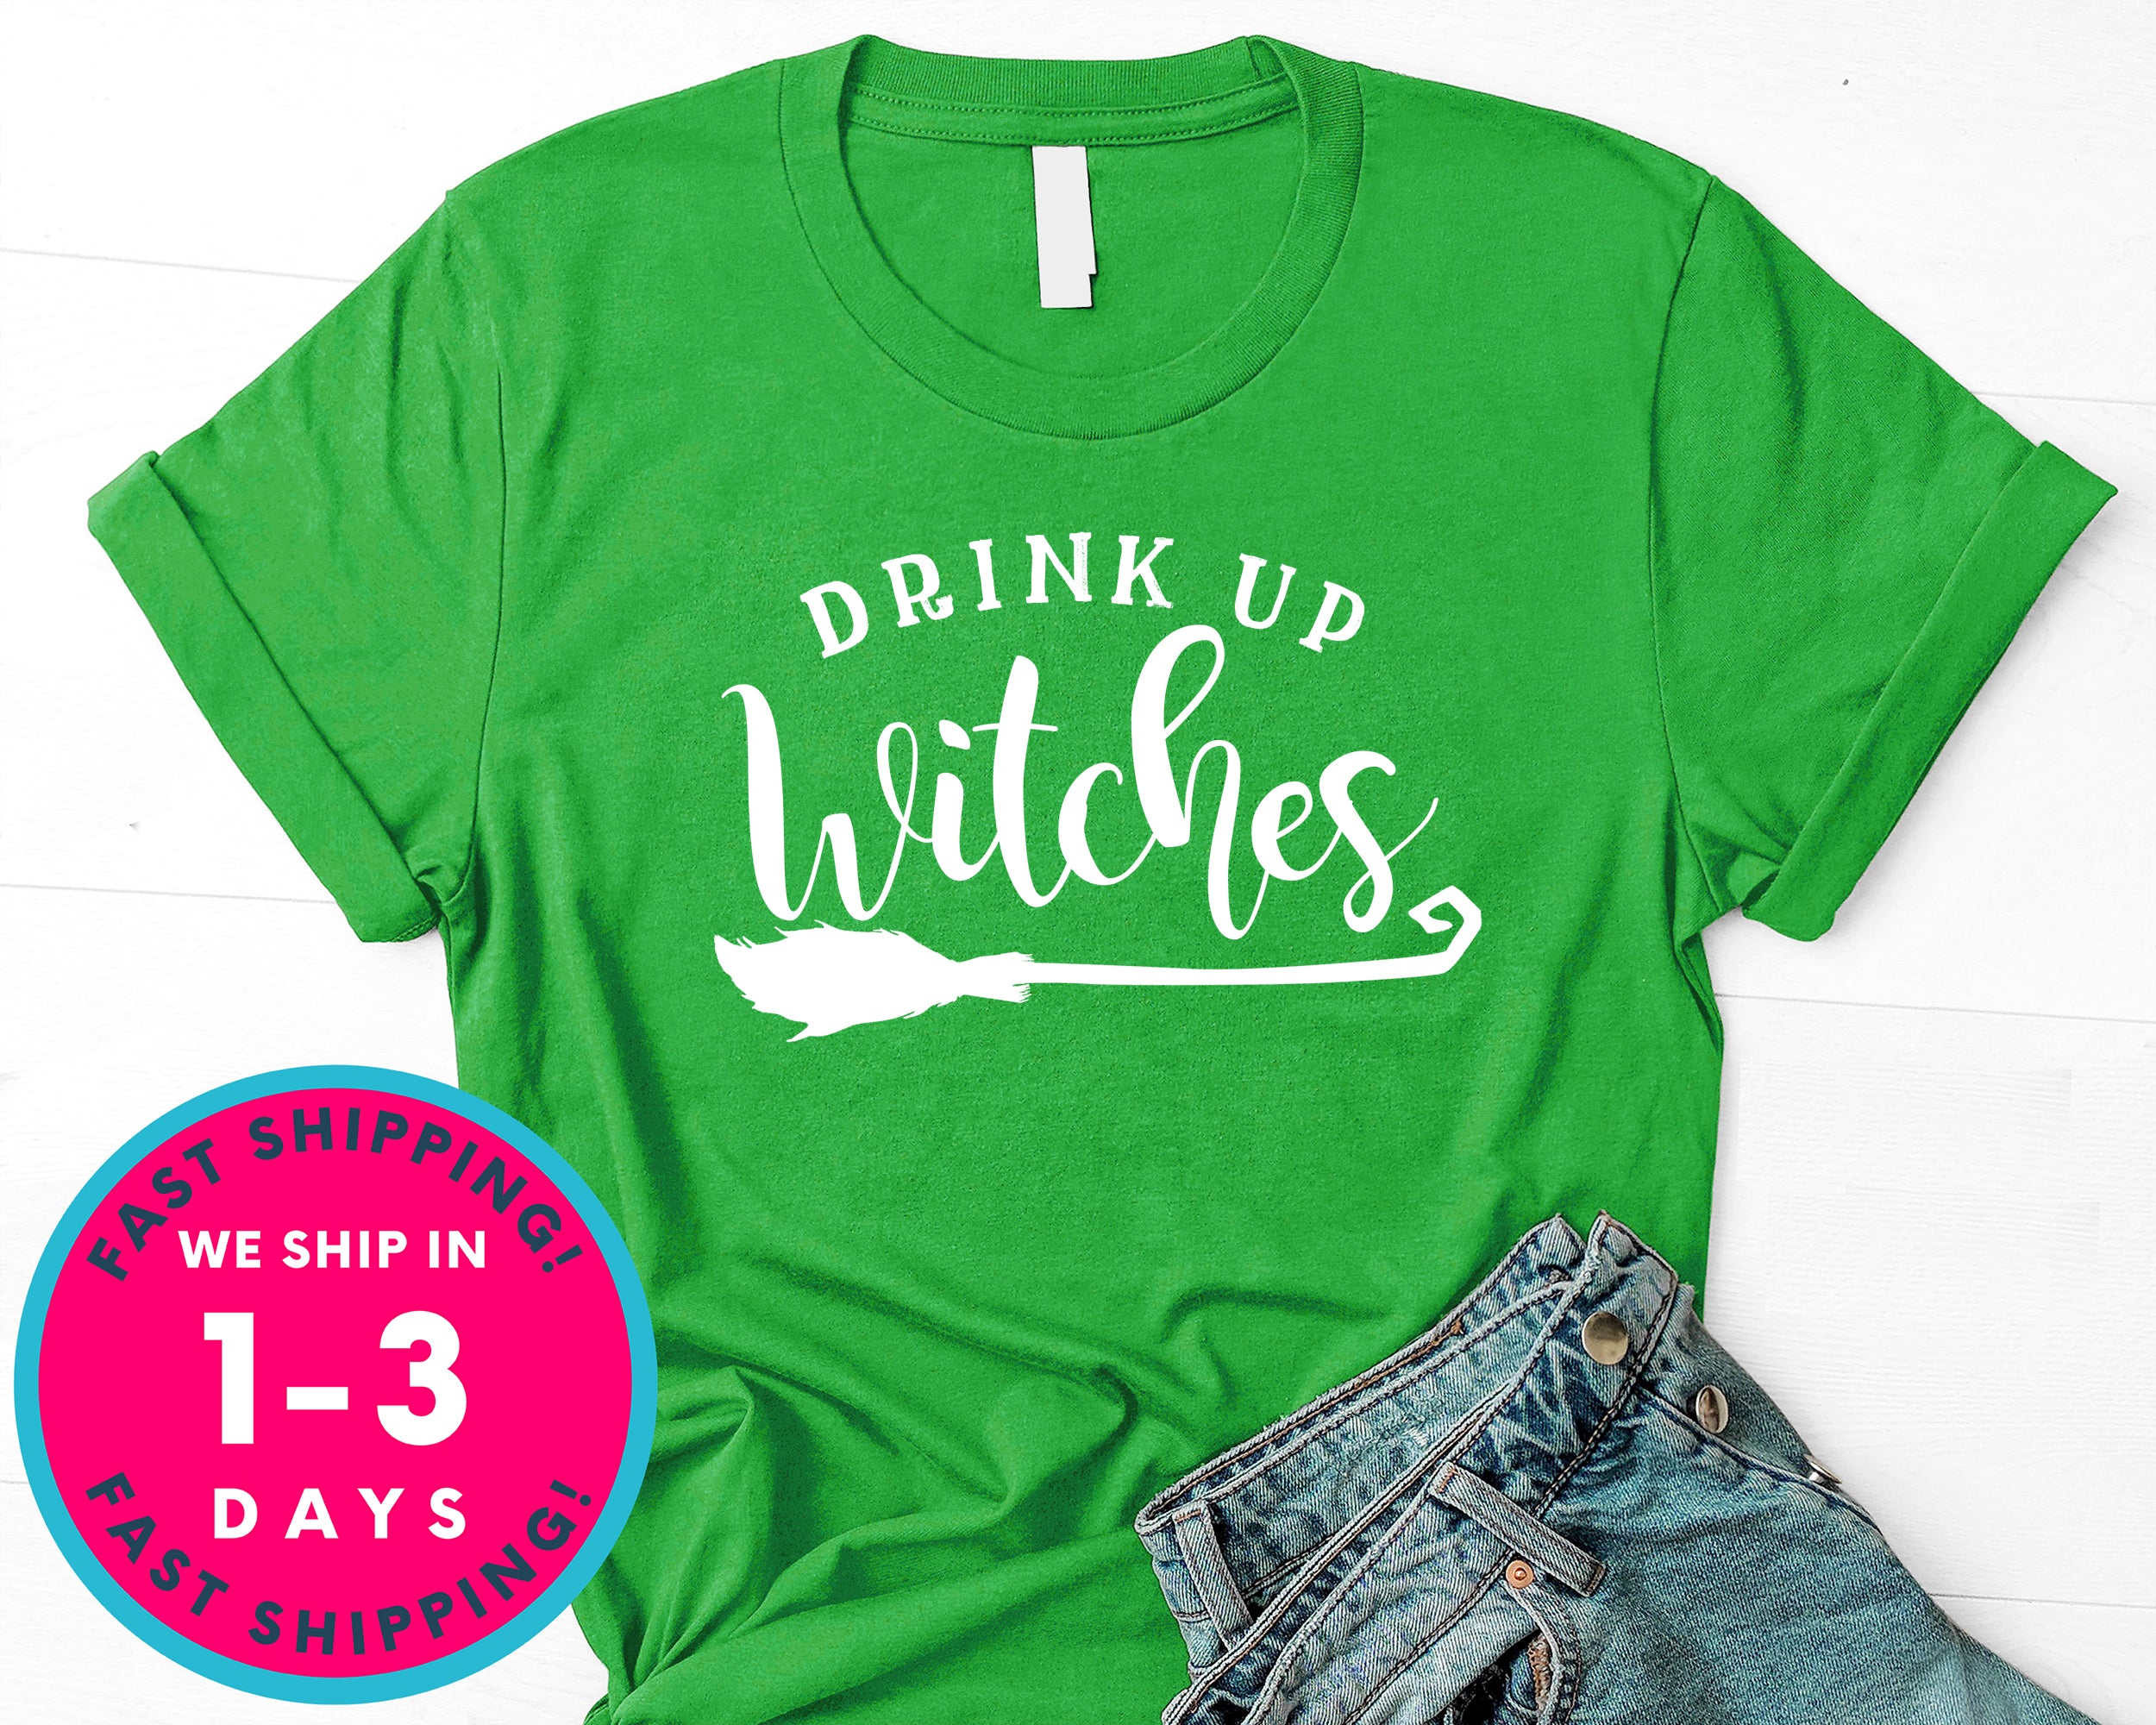 Drink Up Witches T-Shirt - Halloween Horror Scary Shirt